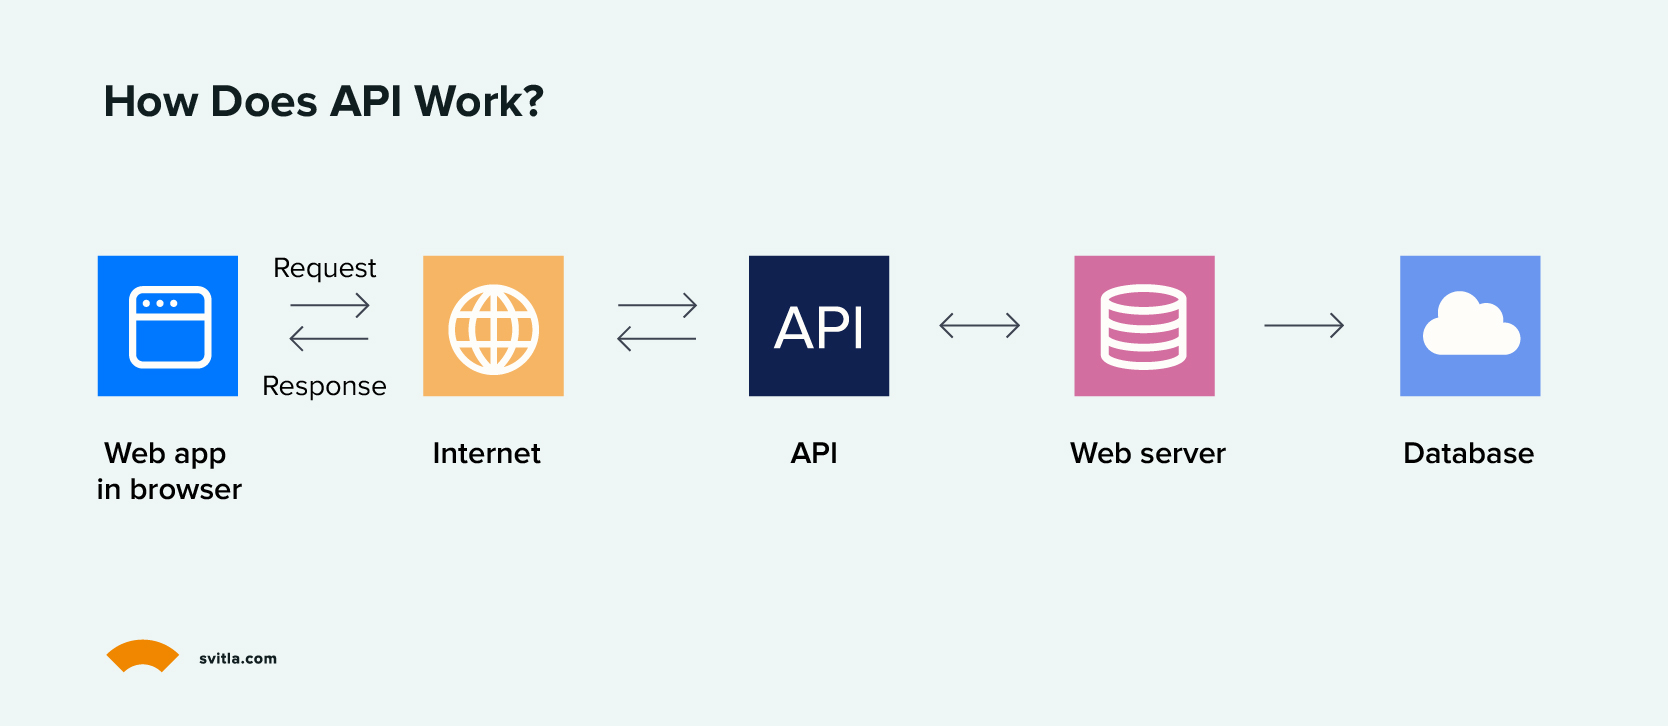 How does APIs work?